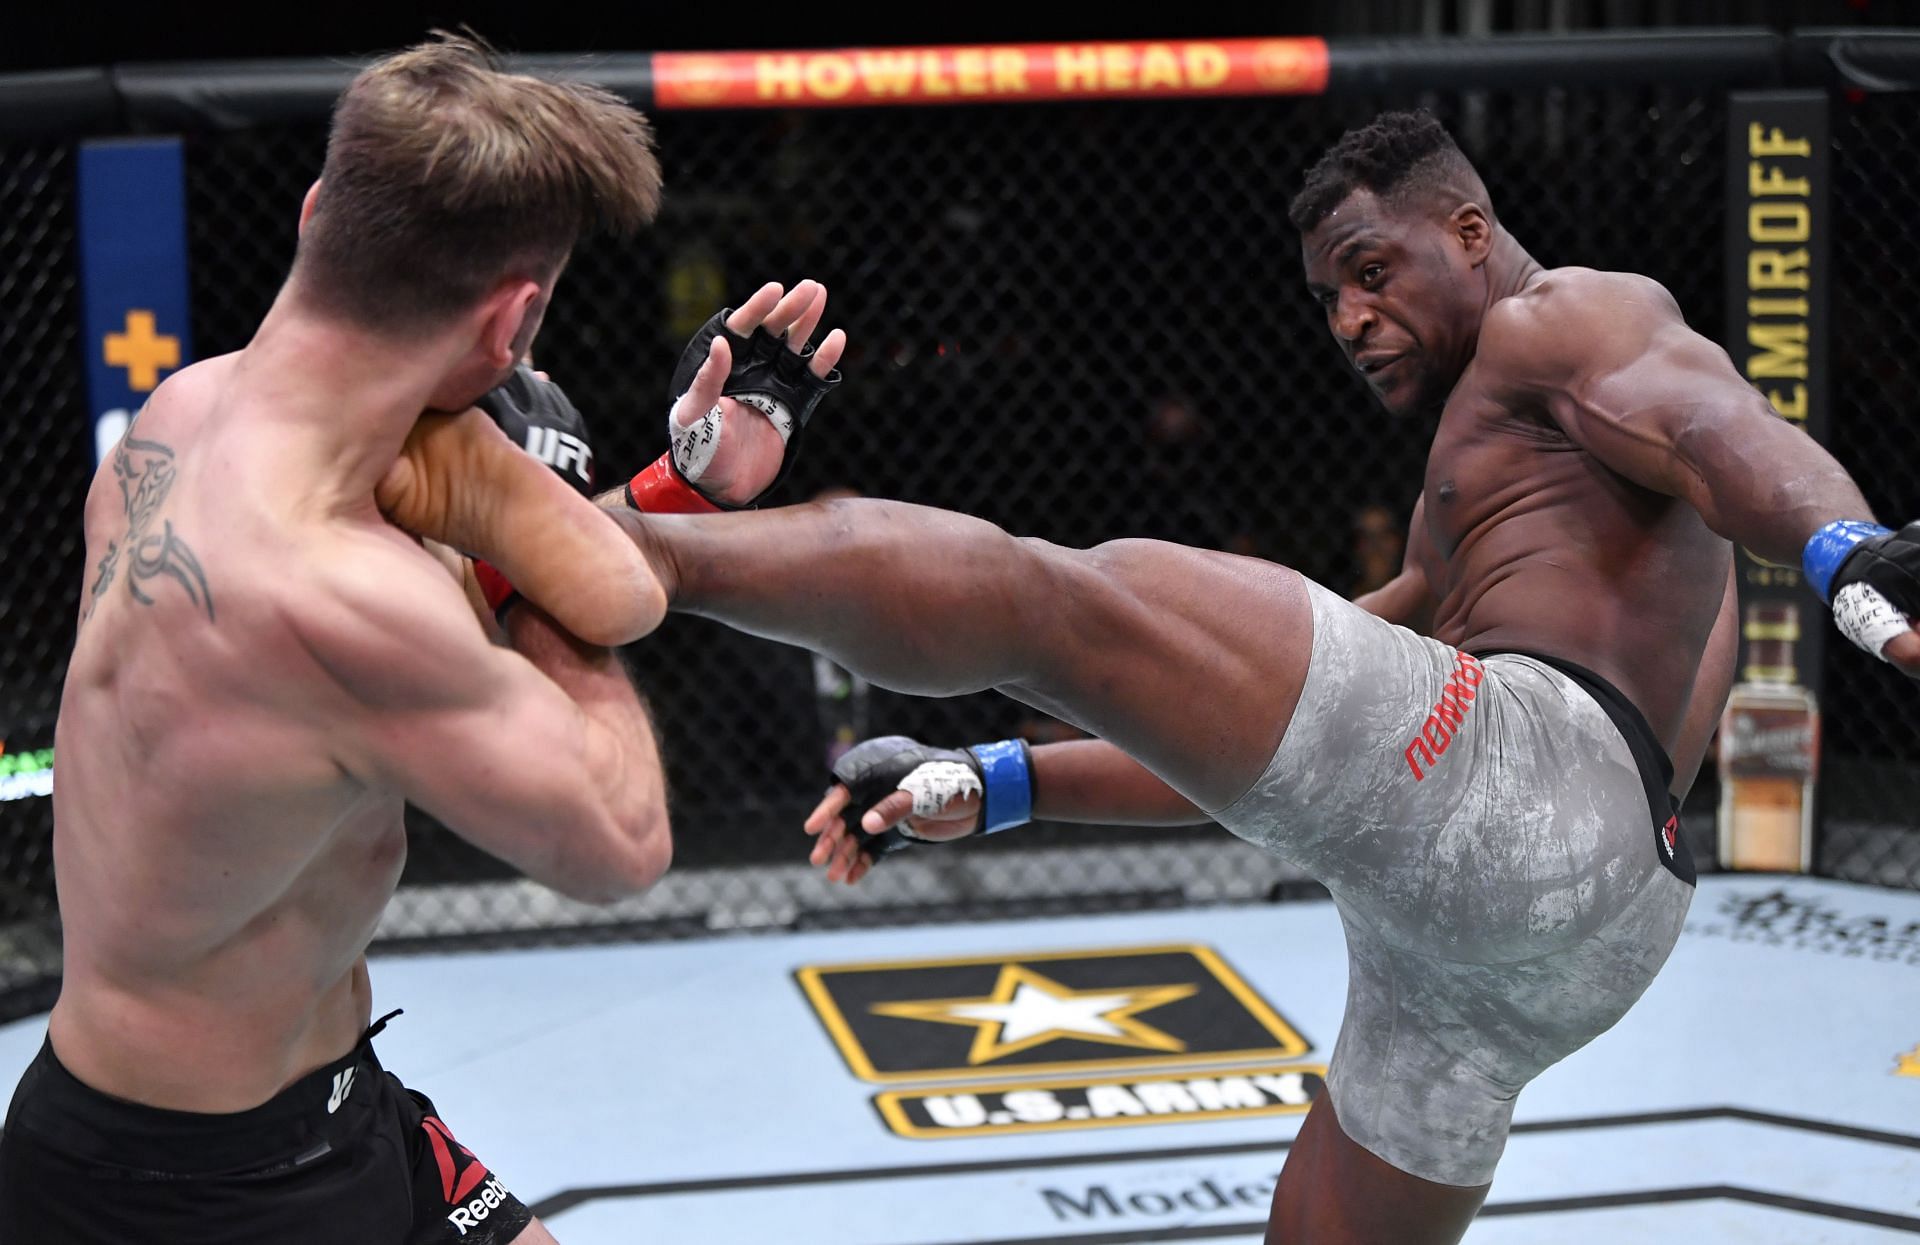 Stipe Miocic (L) and Francis Ngannou (R) have a combined record of 37-7